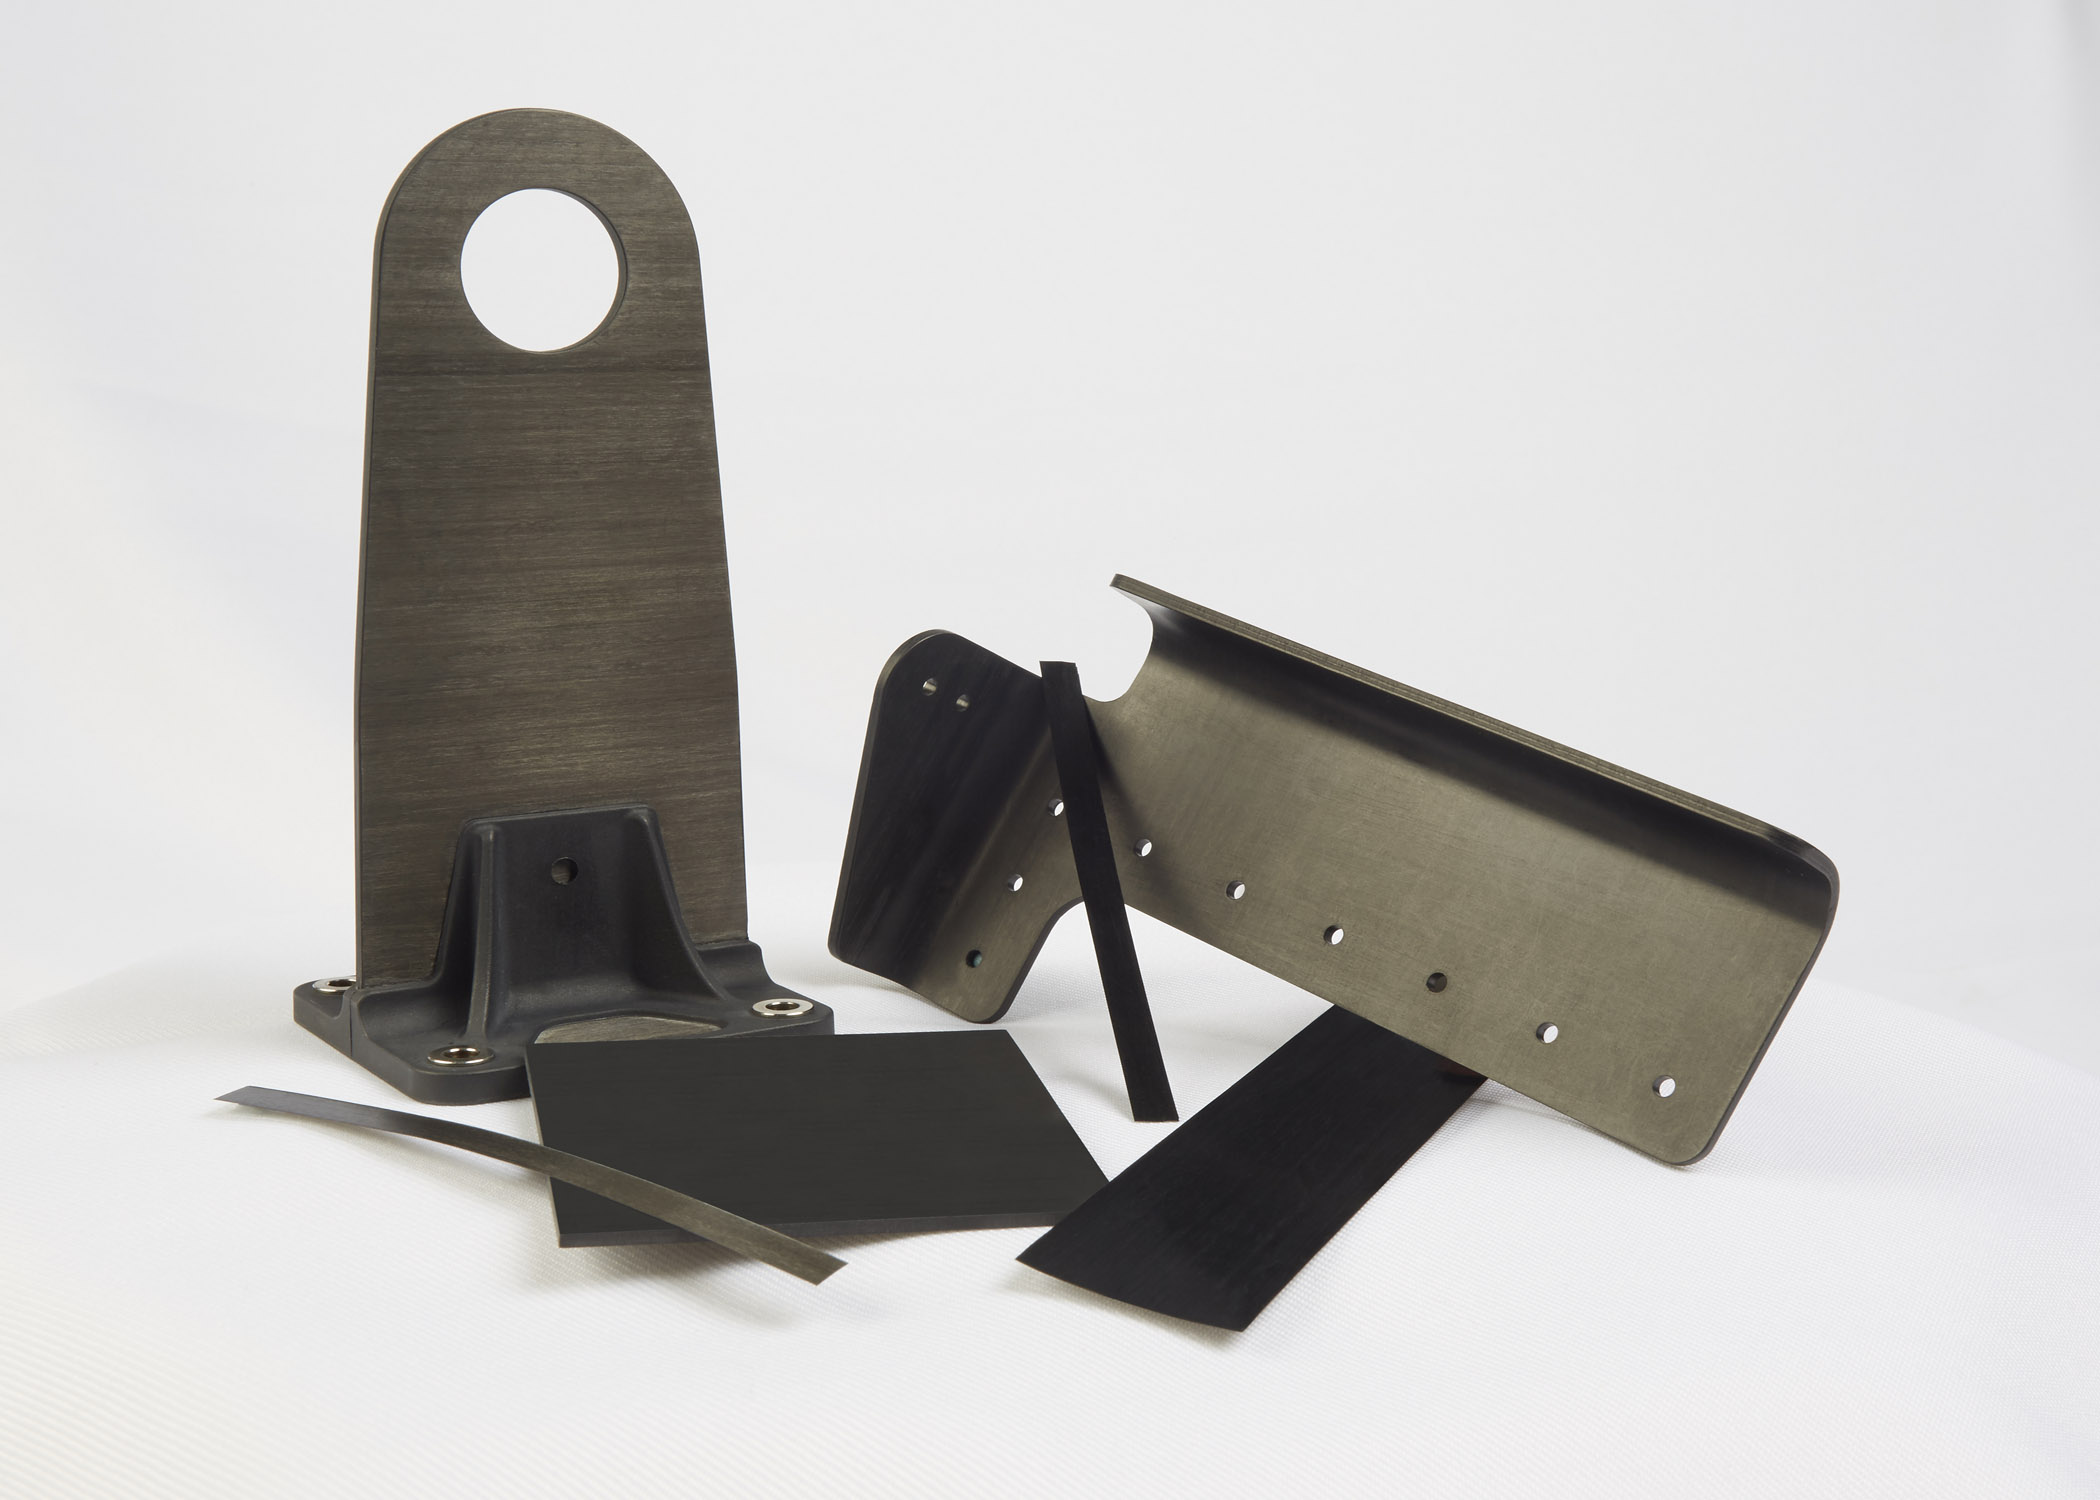 Using thermoplastic to make a composite part could reduce manufacturing time.